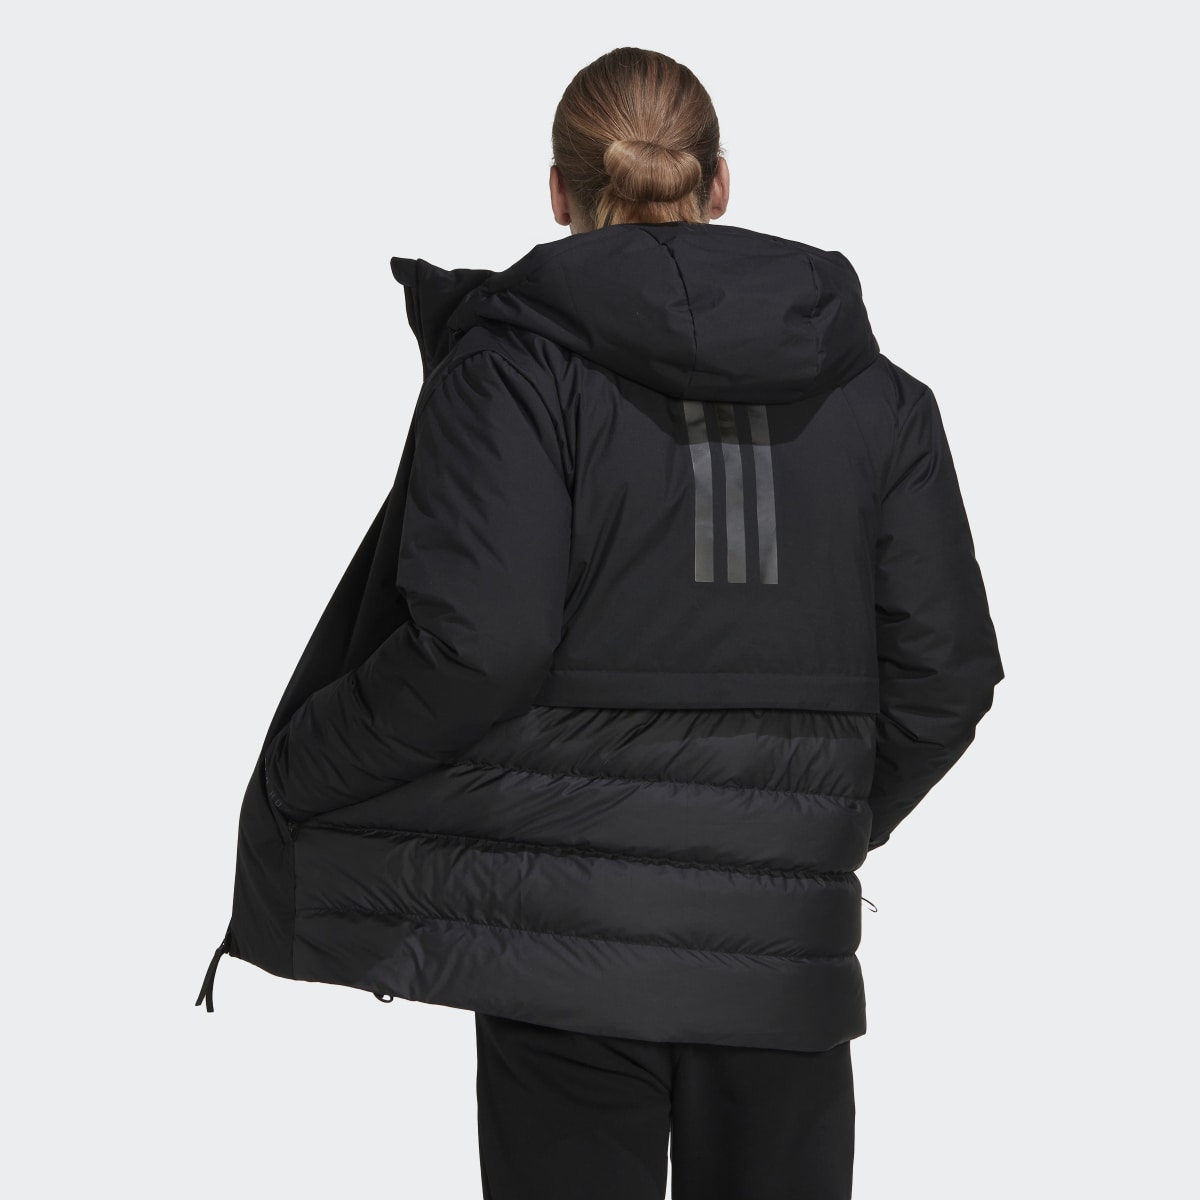 Adidas Traveer COLD.RDY Jacket. 4